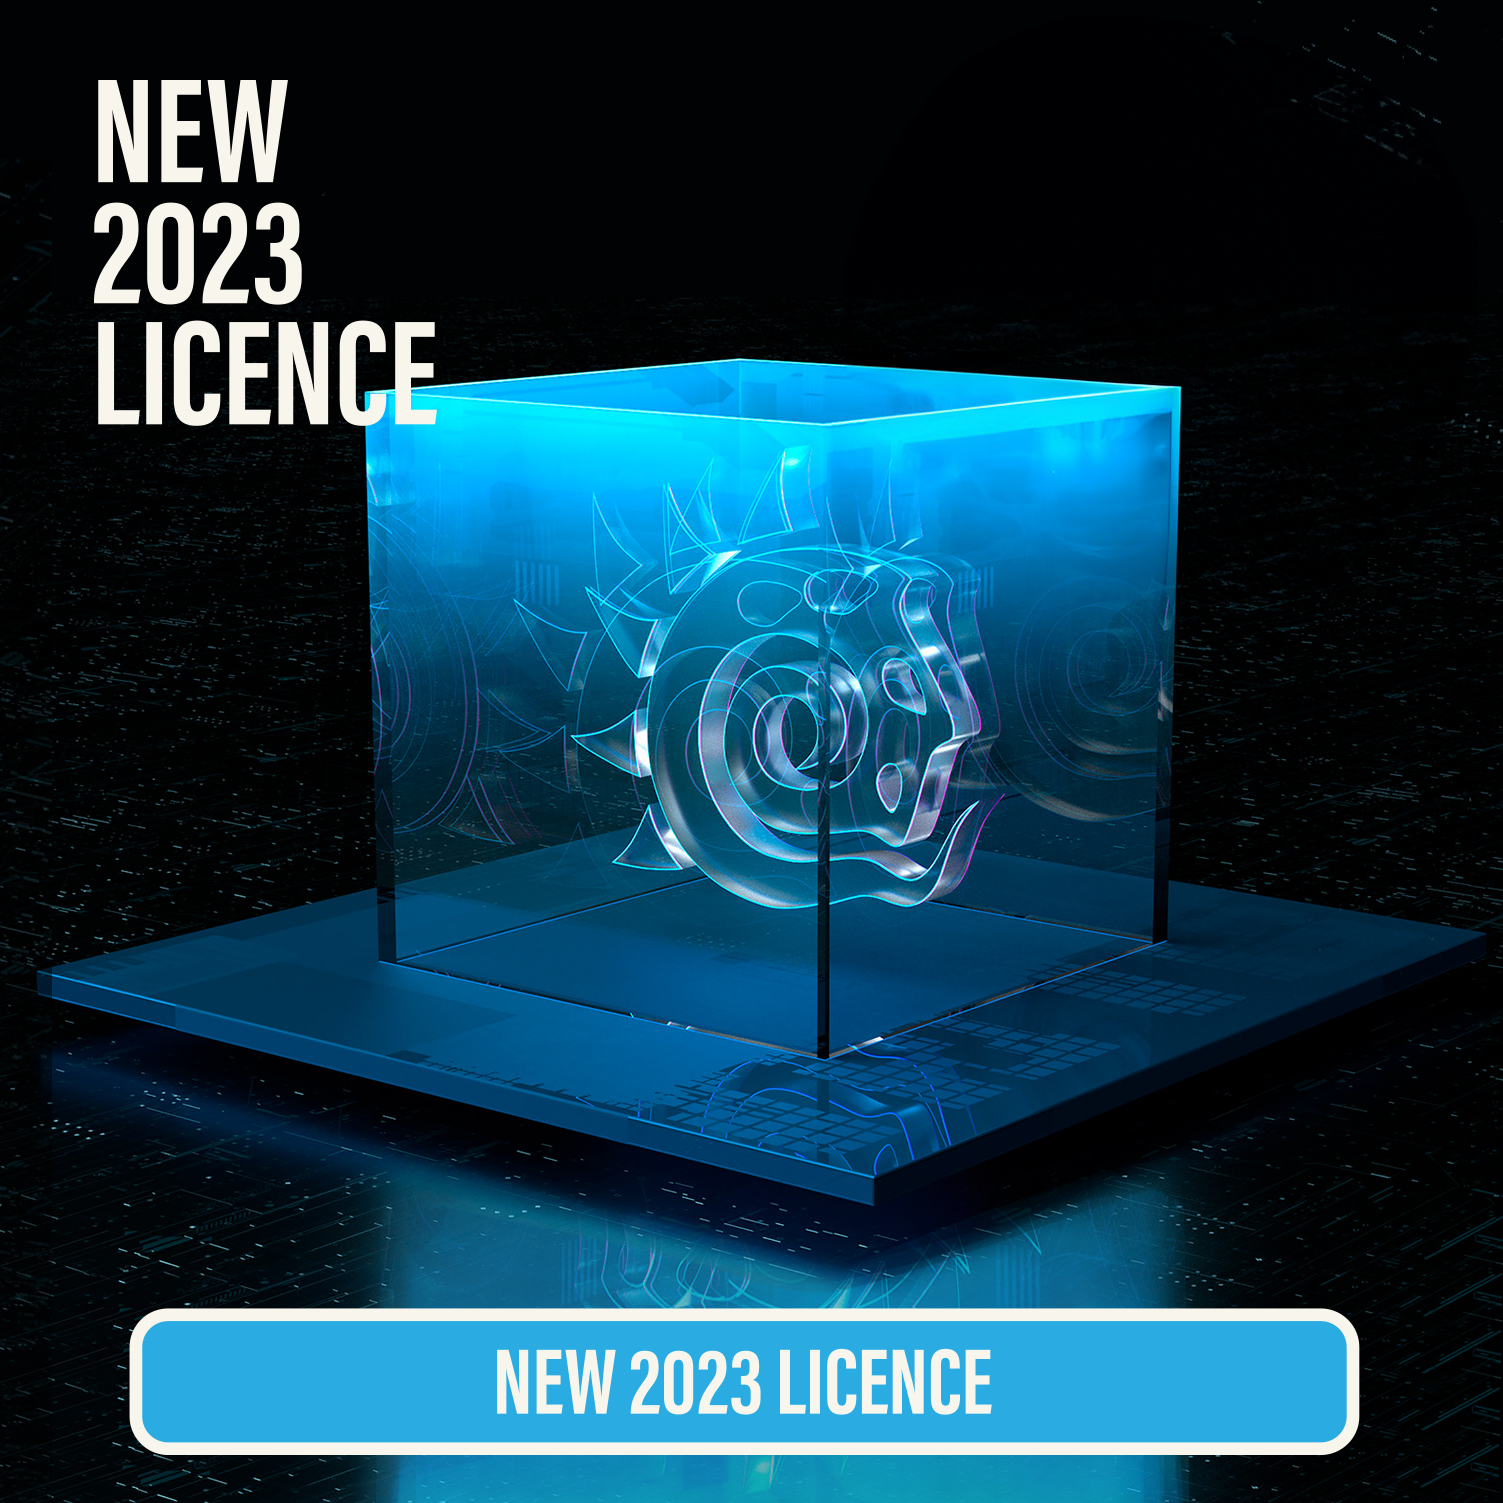 NEW_2023_LICENCE_No_stamp